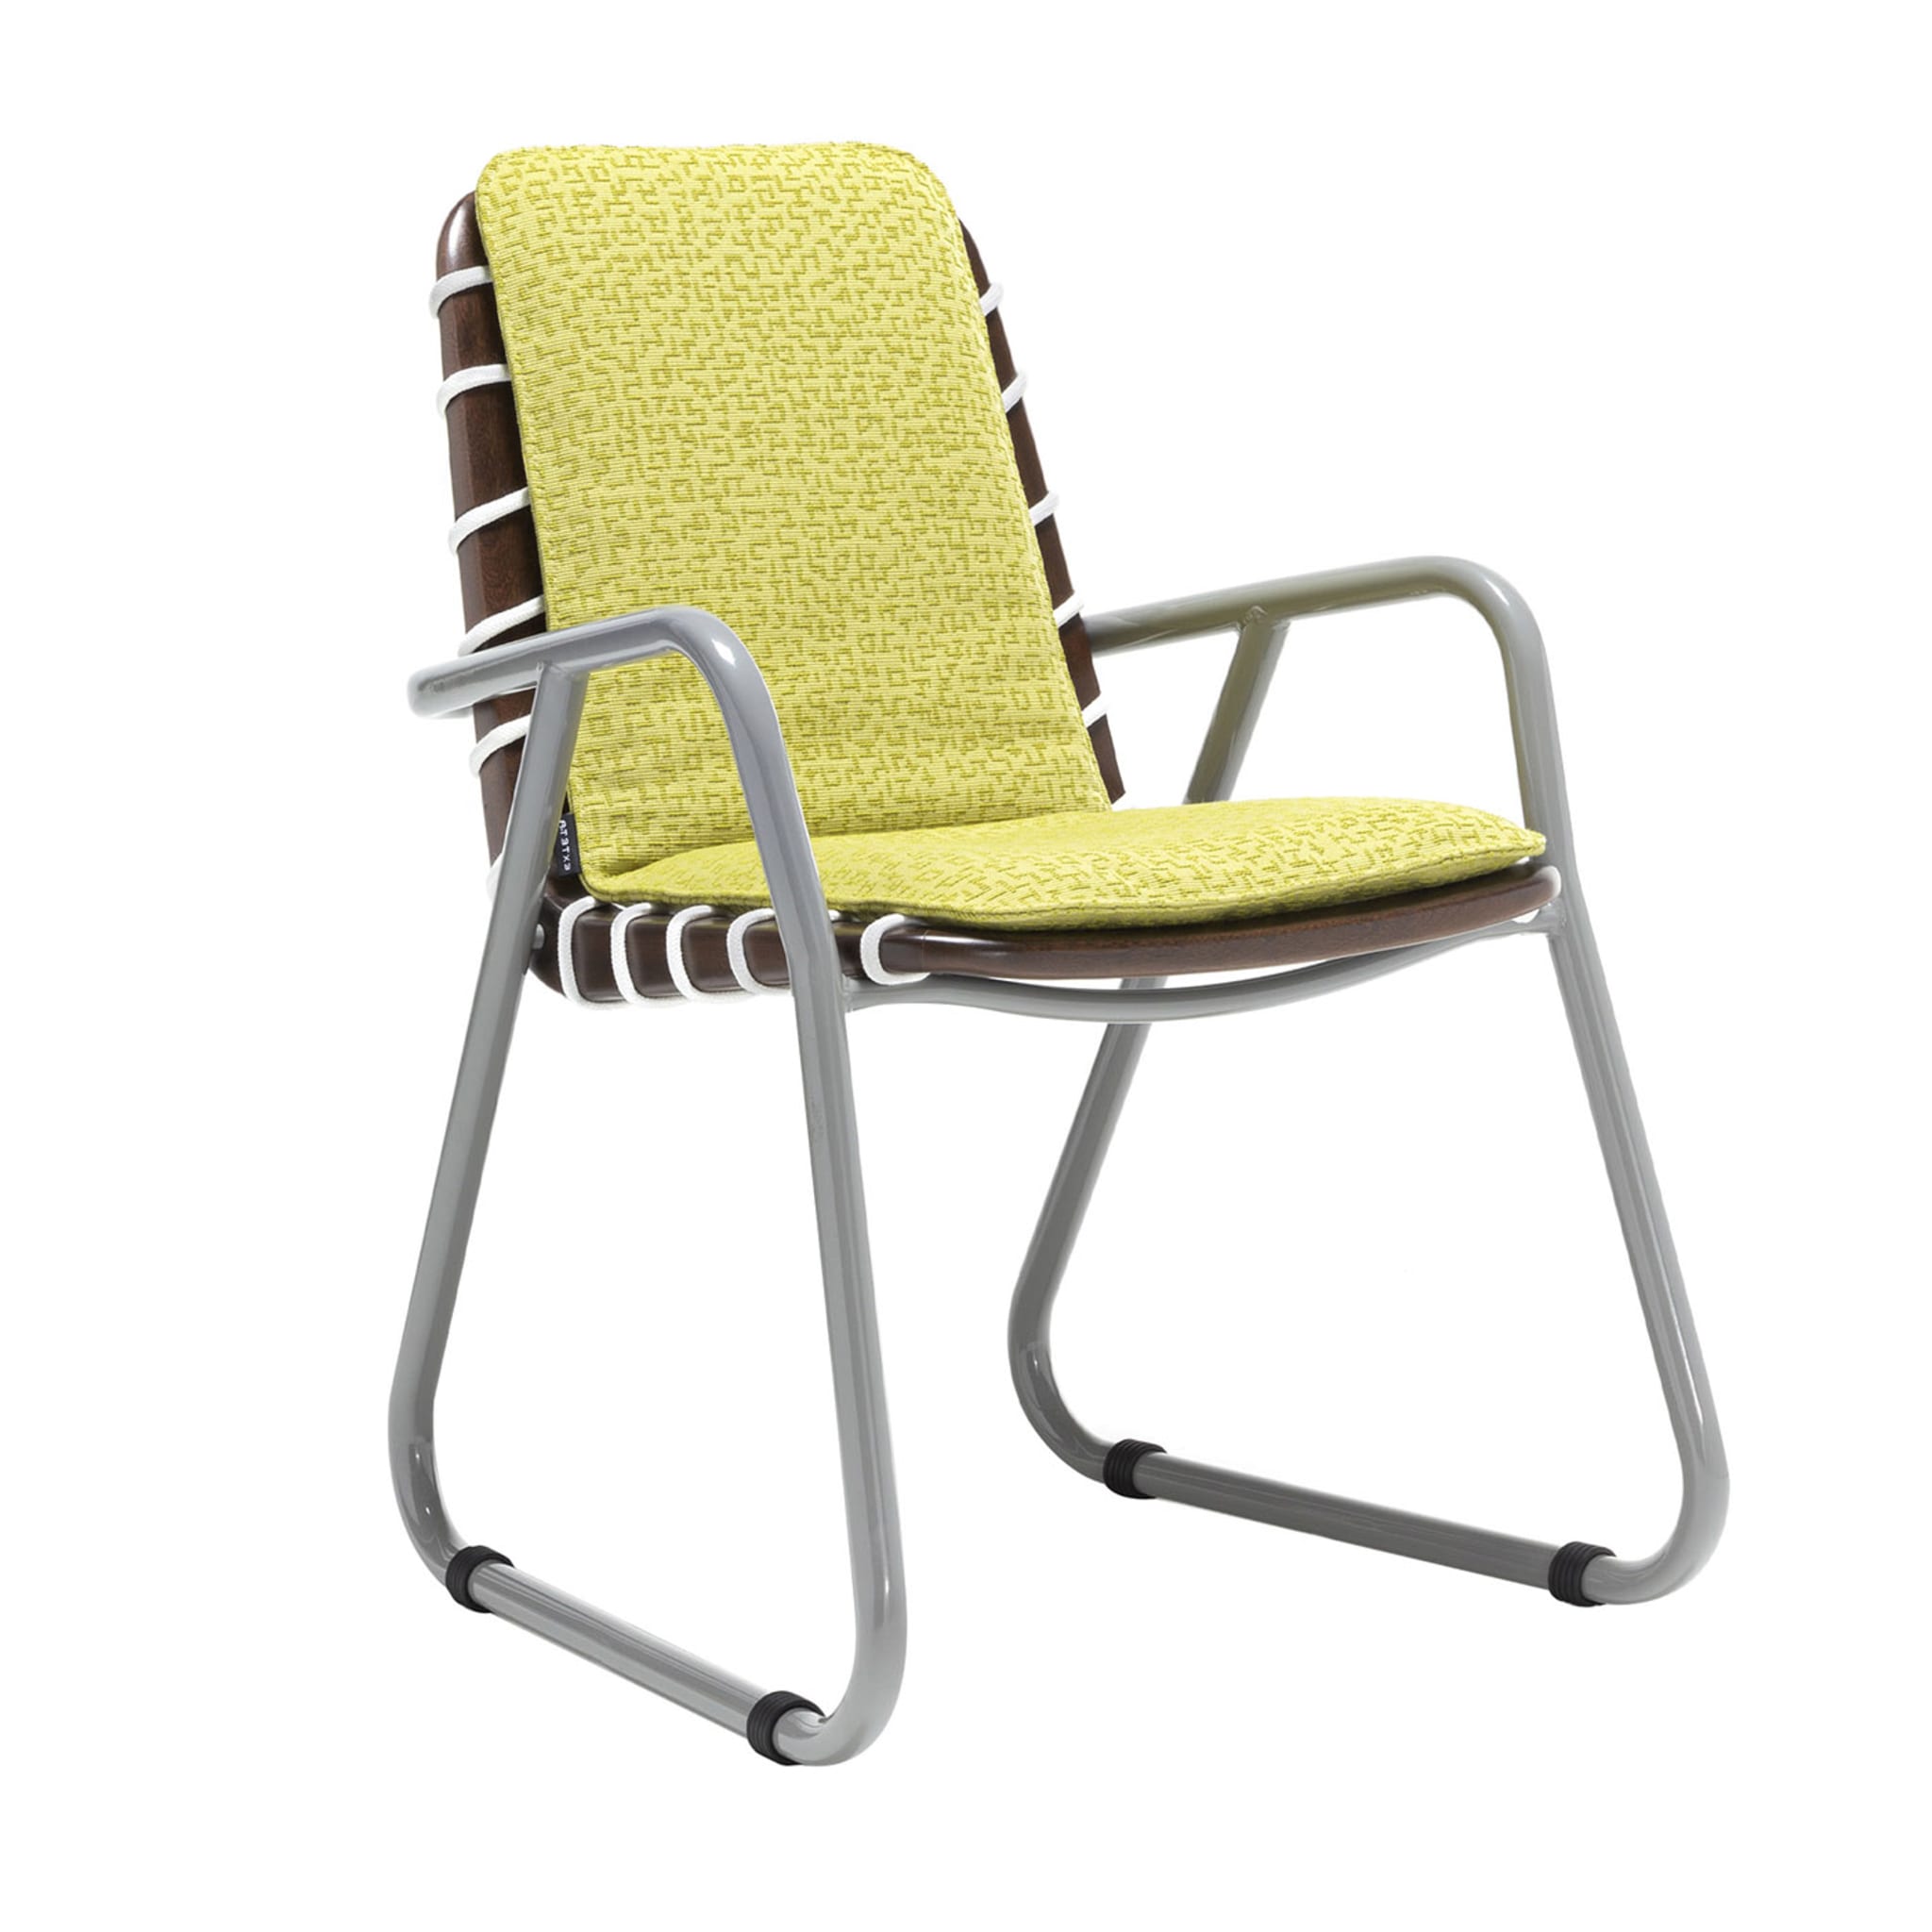 Sunset Yellow Dining Armchair by Paola Navone - Main view